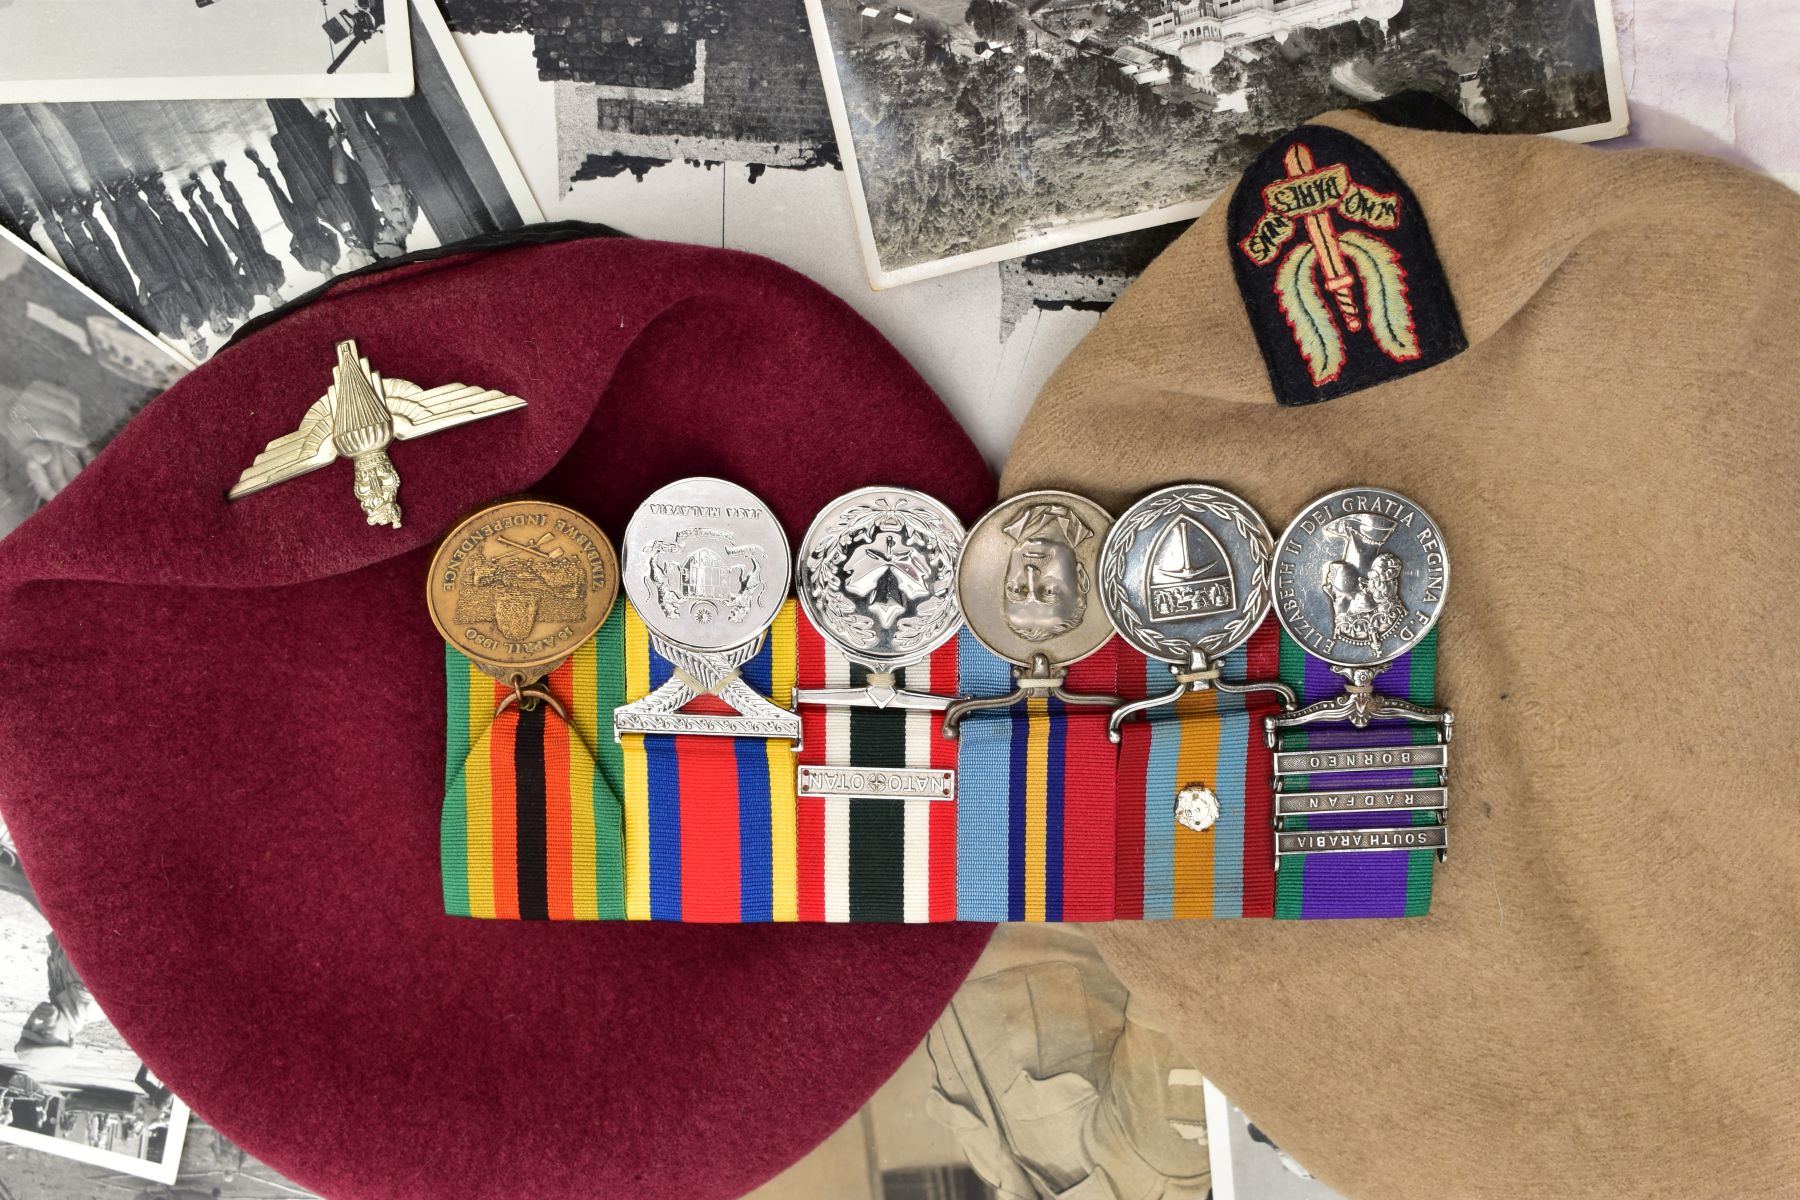 A UNIQUE GROUP OF SIX MEDALS to Roger Brian Carden TATTERSALL, born 30th June 1938, a member of - Image 15 of 37